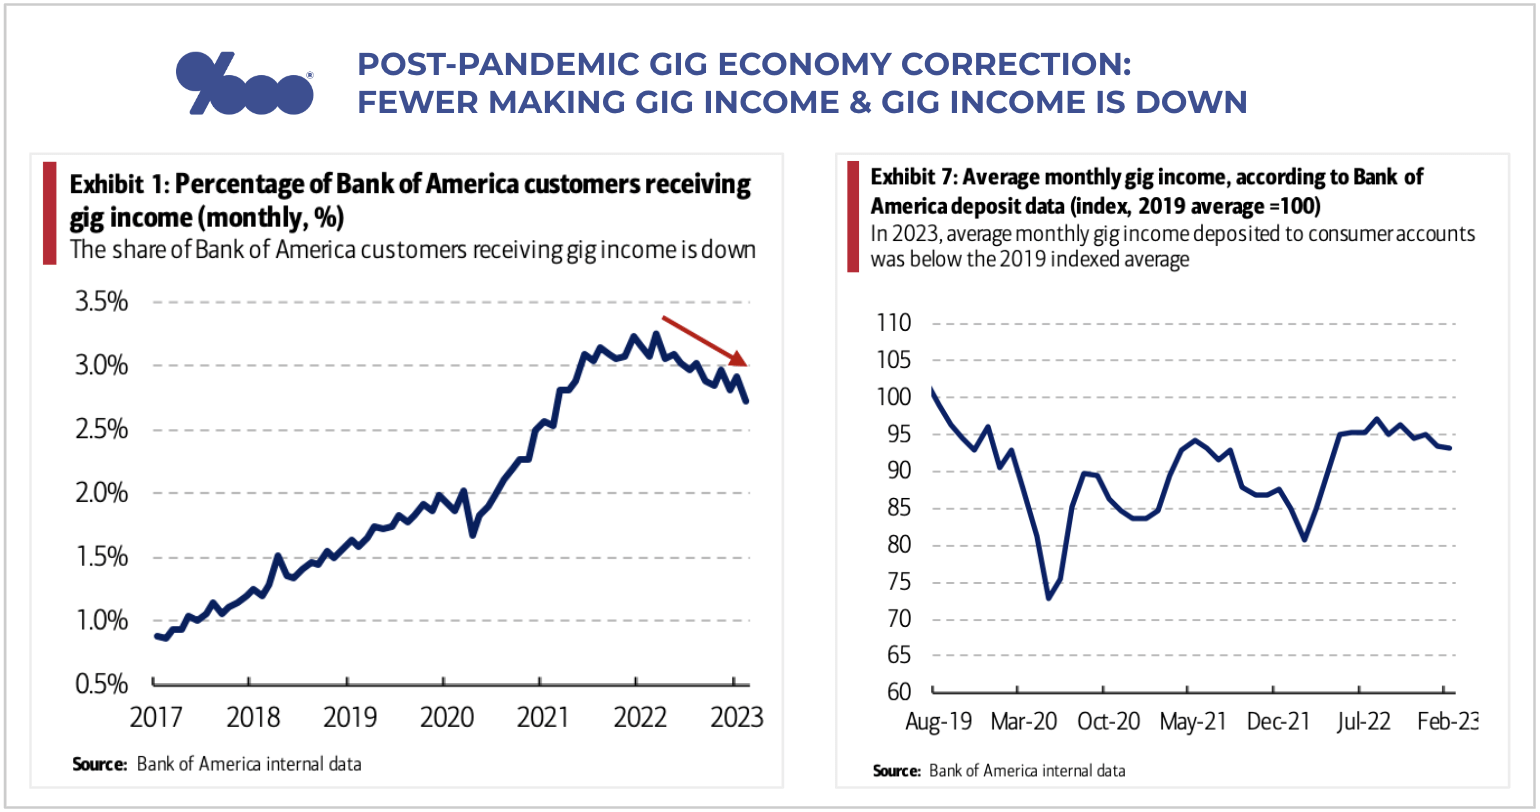 Post pandemic gig economy slowing - BofA reports fewer making gig income and overall gig income is down - The Basis Point